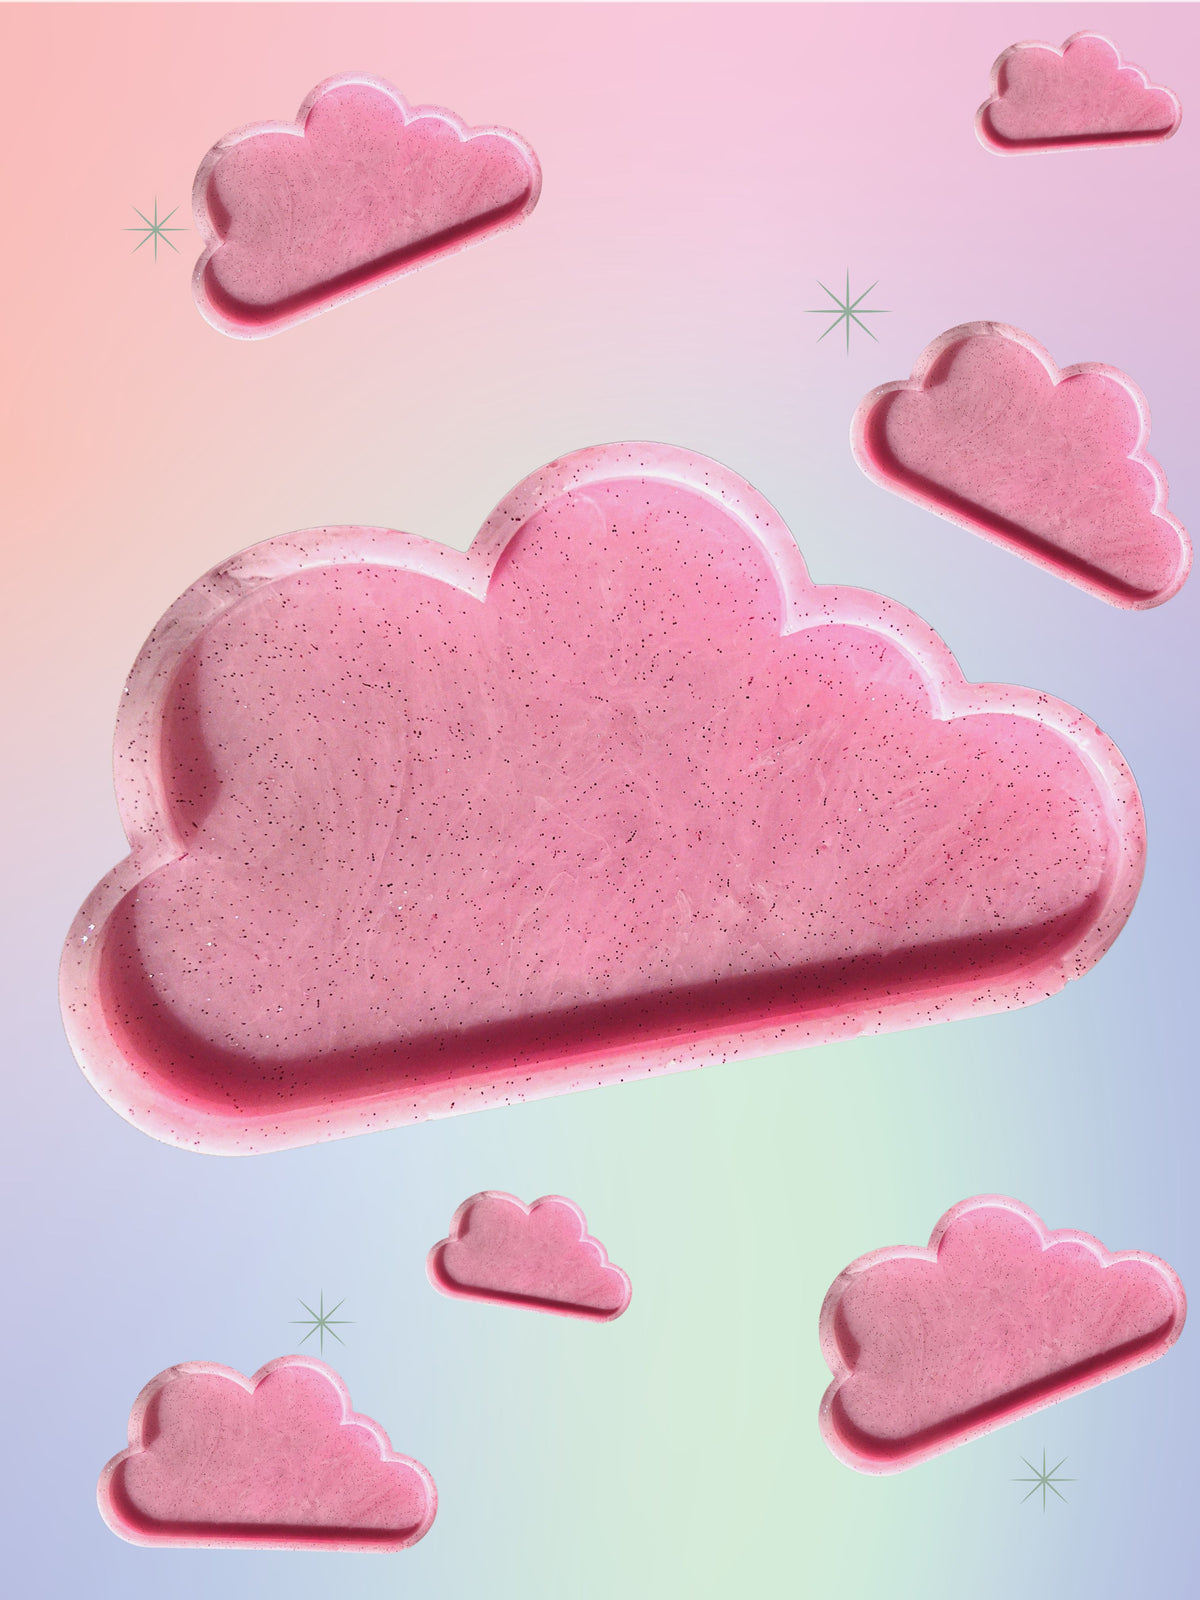 cloud decorative tray, decorative tray, resin tray for sale, cloud tray, y2k, epoxy resin tray, resin tray for sale, handmade gifts, gifts for her, gifts for kids, home decor ideas, shower resin tray, pink tray, storage tray